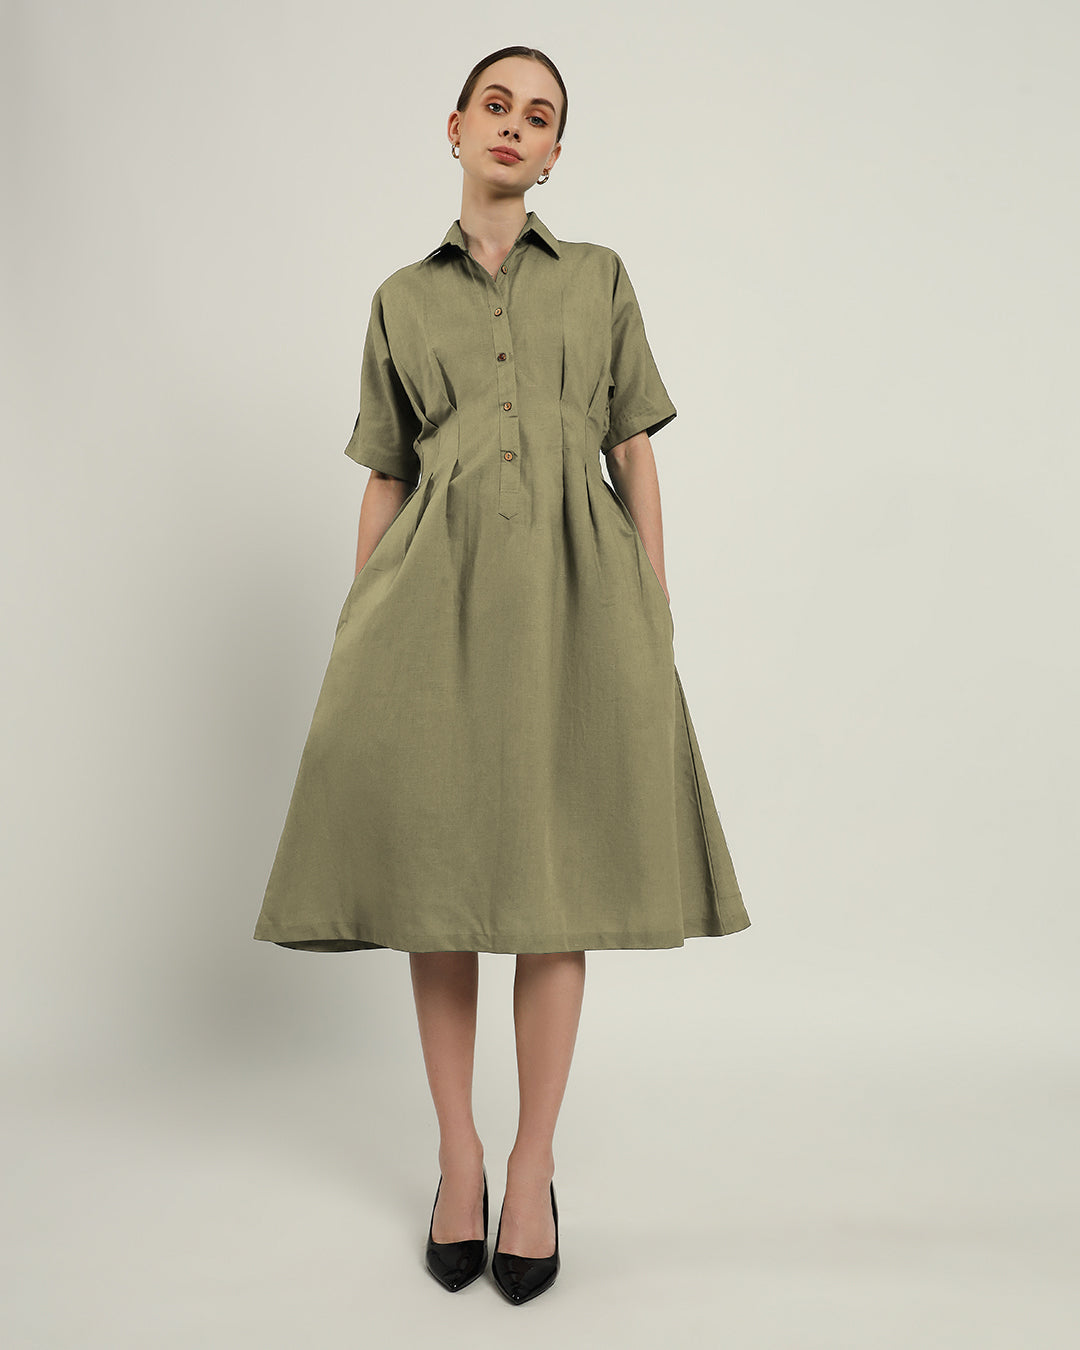 The Salford Daisy Olive Linen Dress